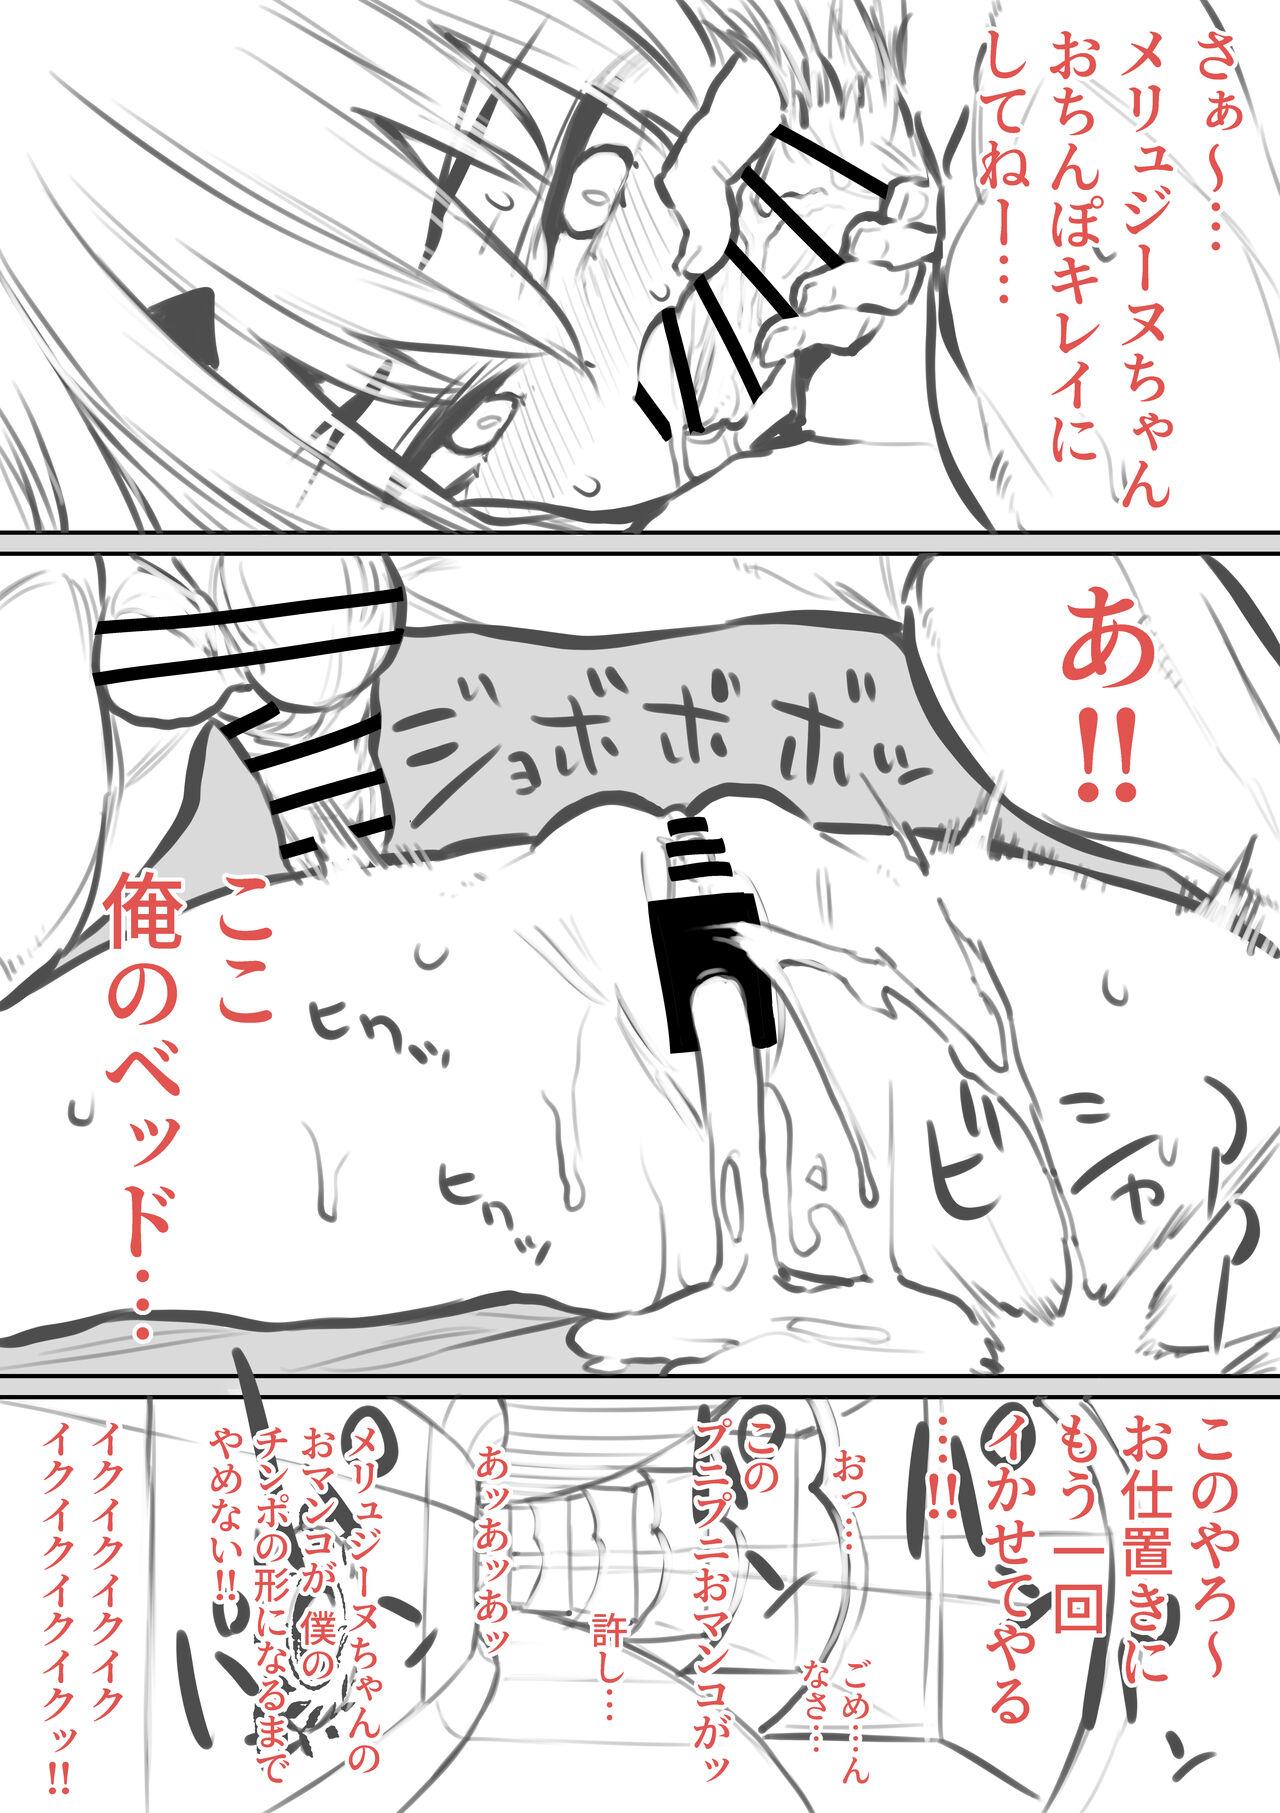 Big Black Cock 媚薬を飲んでカルデア職員にヤられちゃう話シリーズ - Fate grand order Gay Doctor - Page 6